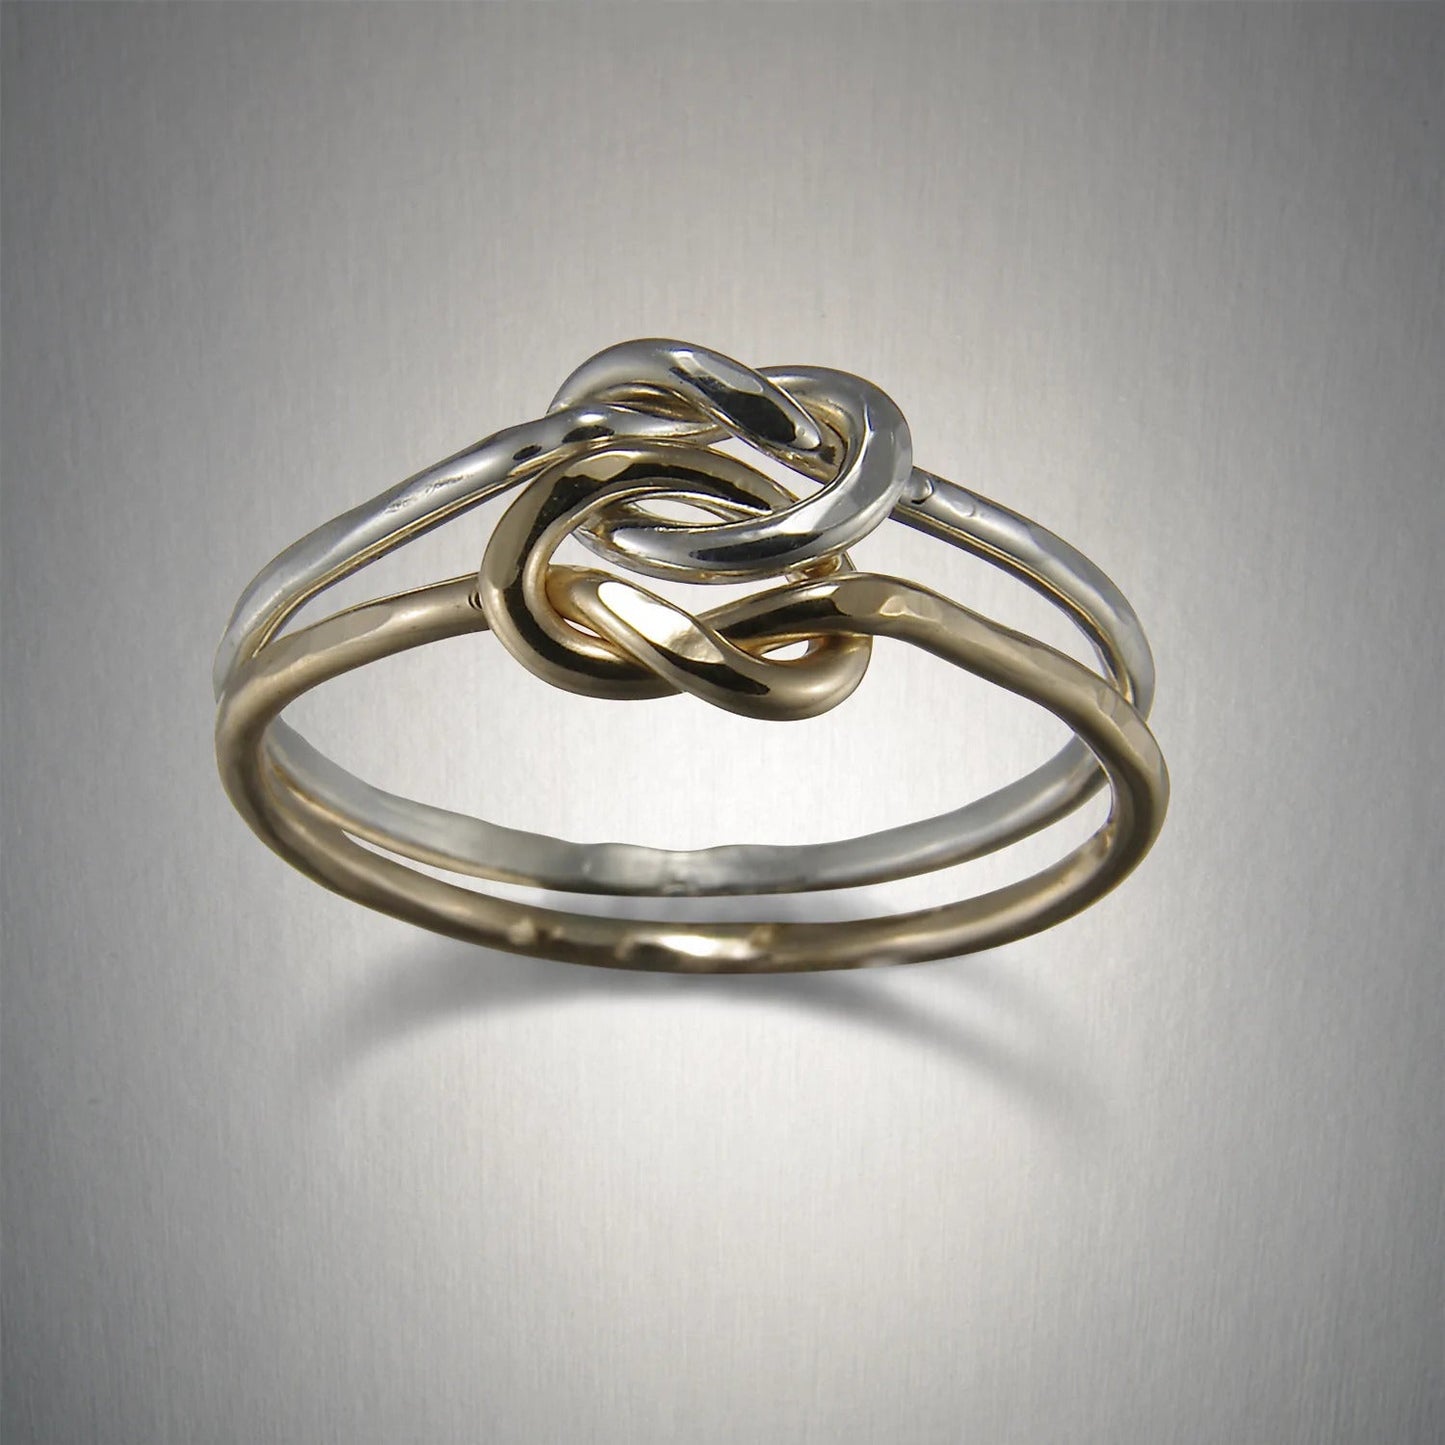 Peter James Mixed Metal Knot in Knot Ring 6